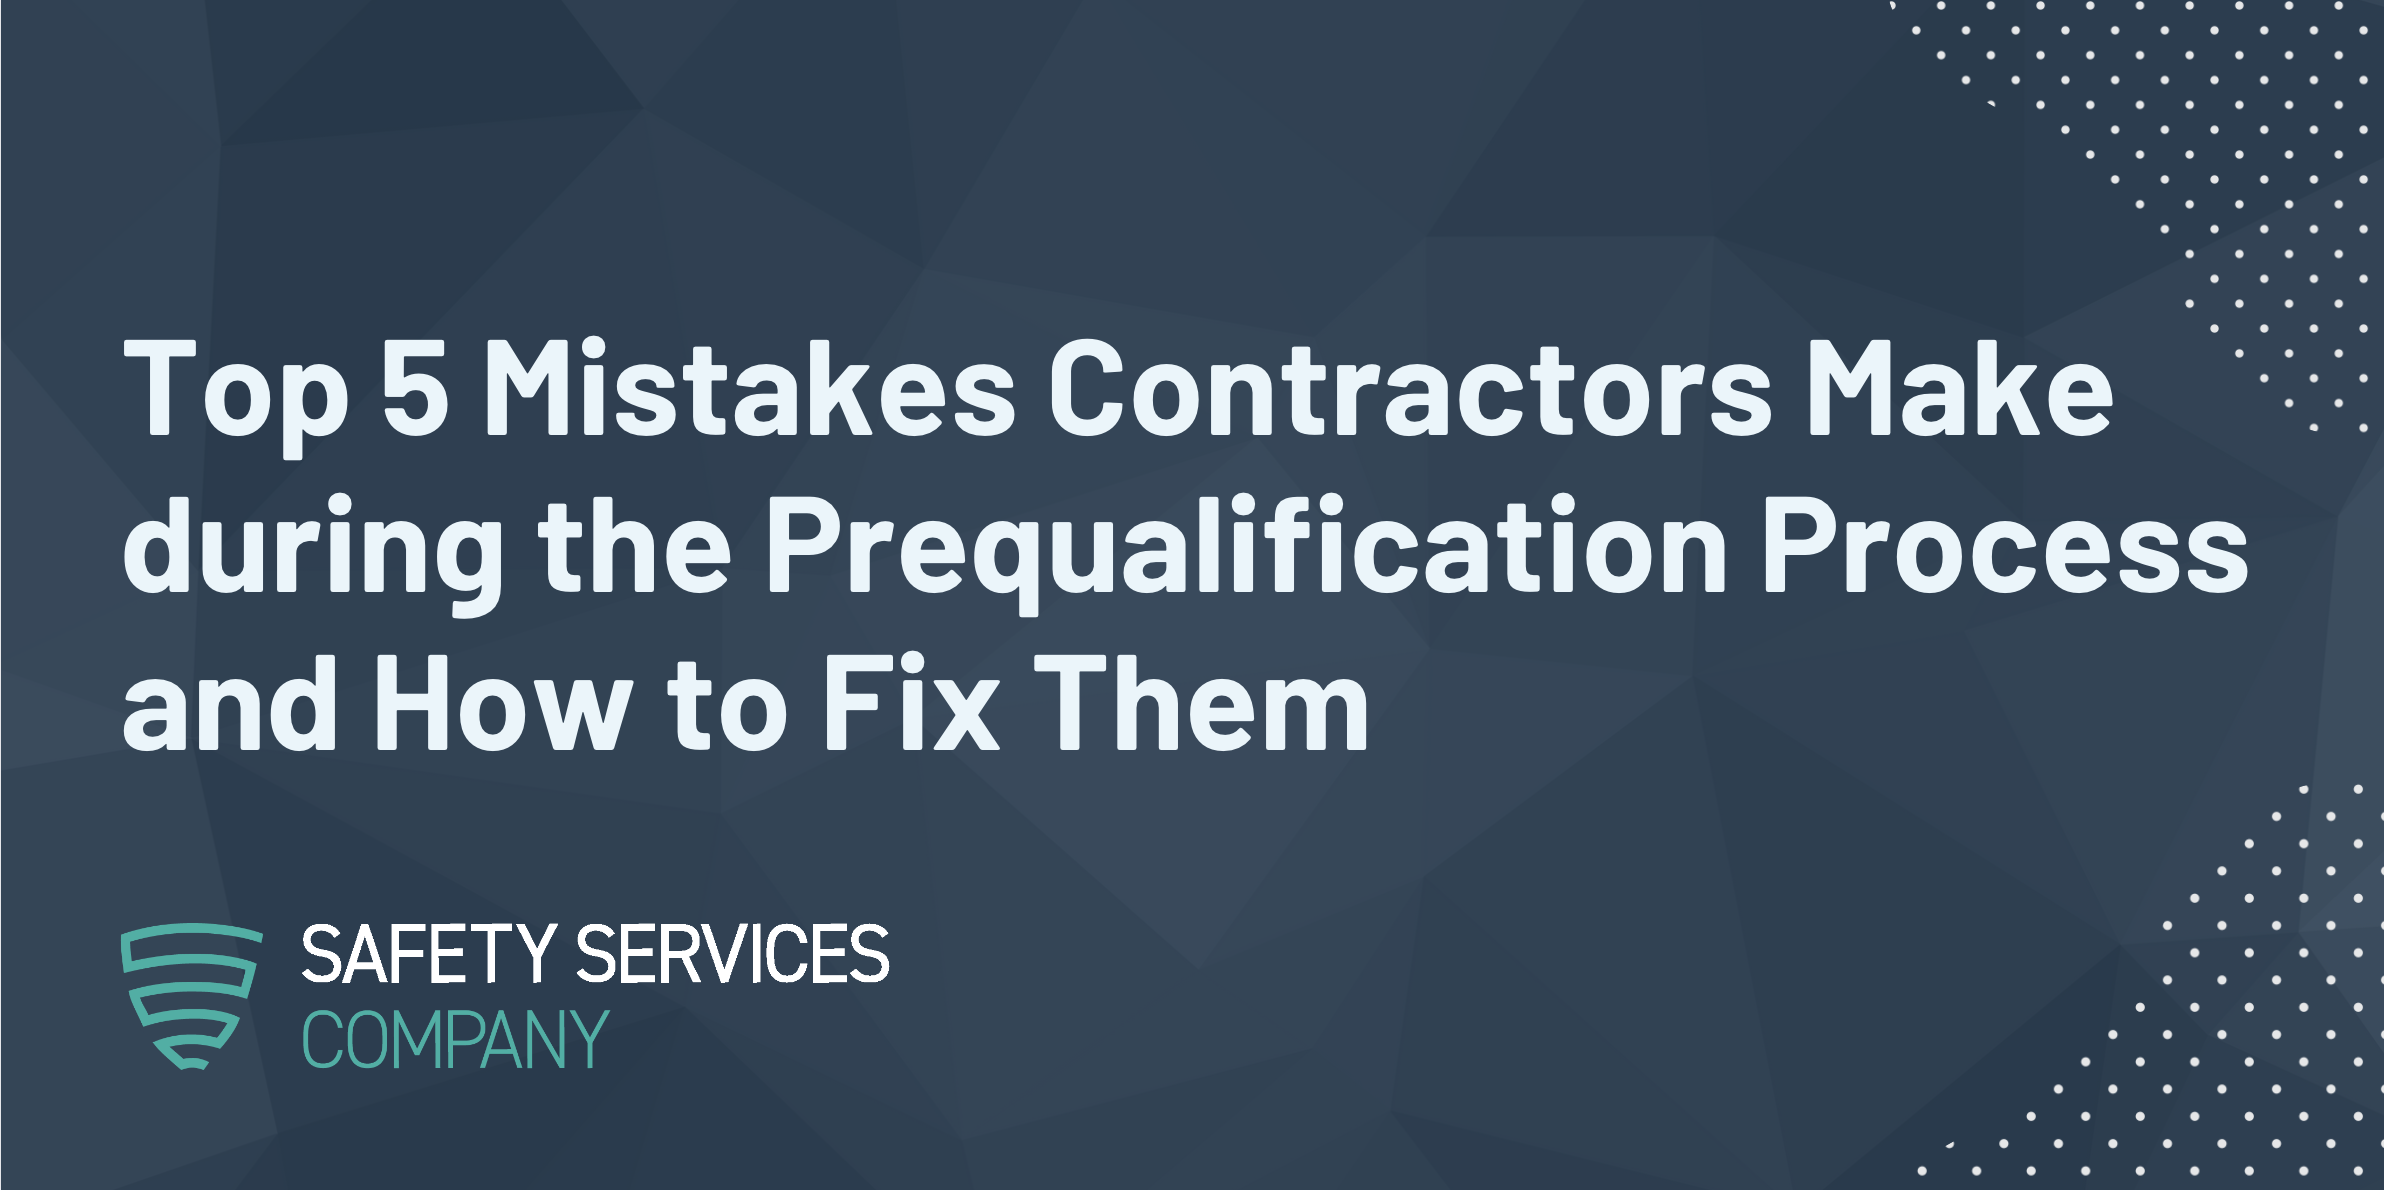 Top 5 Mistakes Contractors Make during the Prequalification Process and How to Fix Them